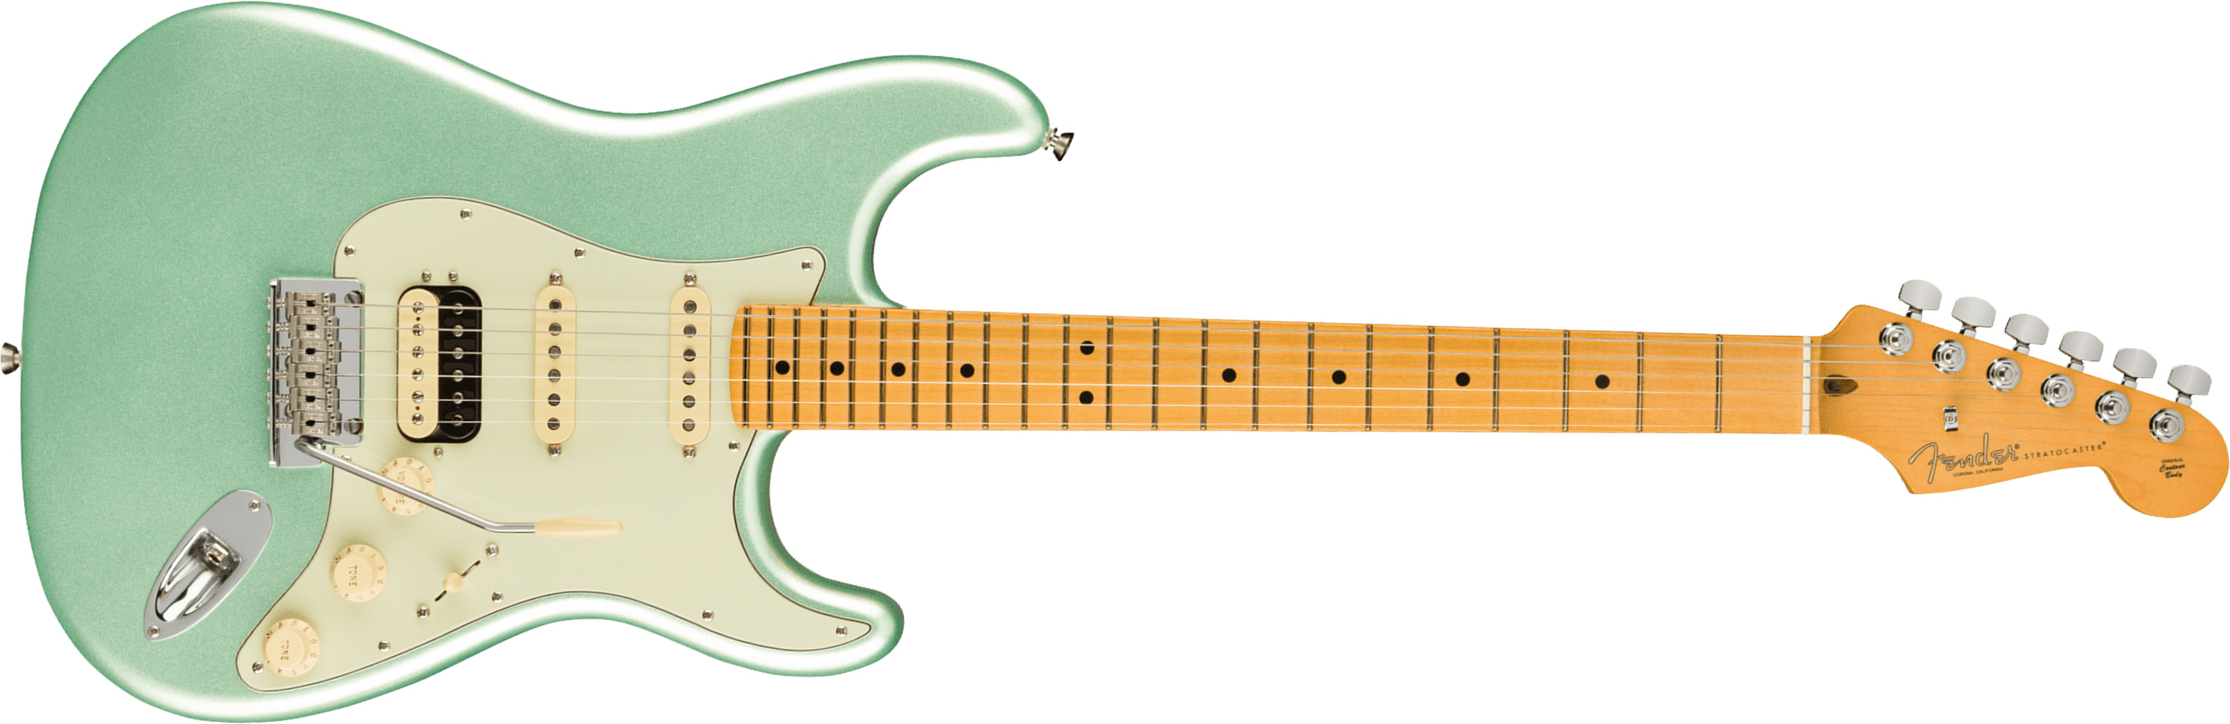 Fender Strat American Professional Ii Hss Usa Mn - Mystic Surf Green - Guitare Électrique Forme Str - Main picture